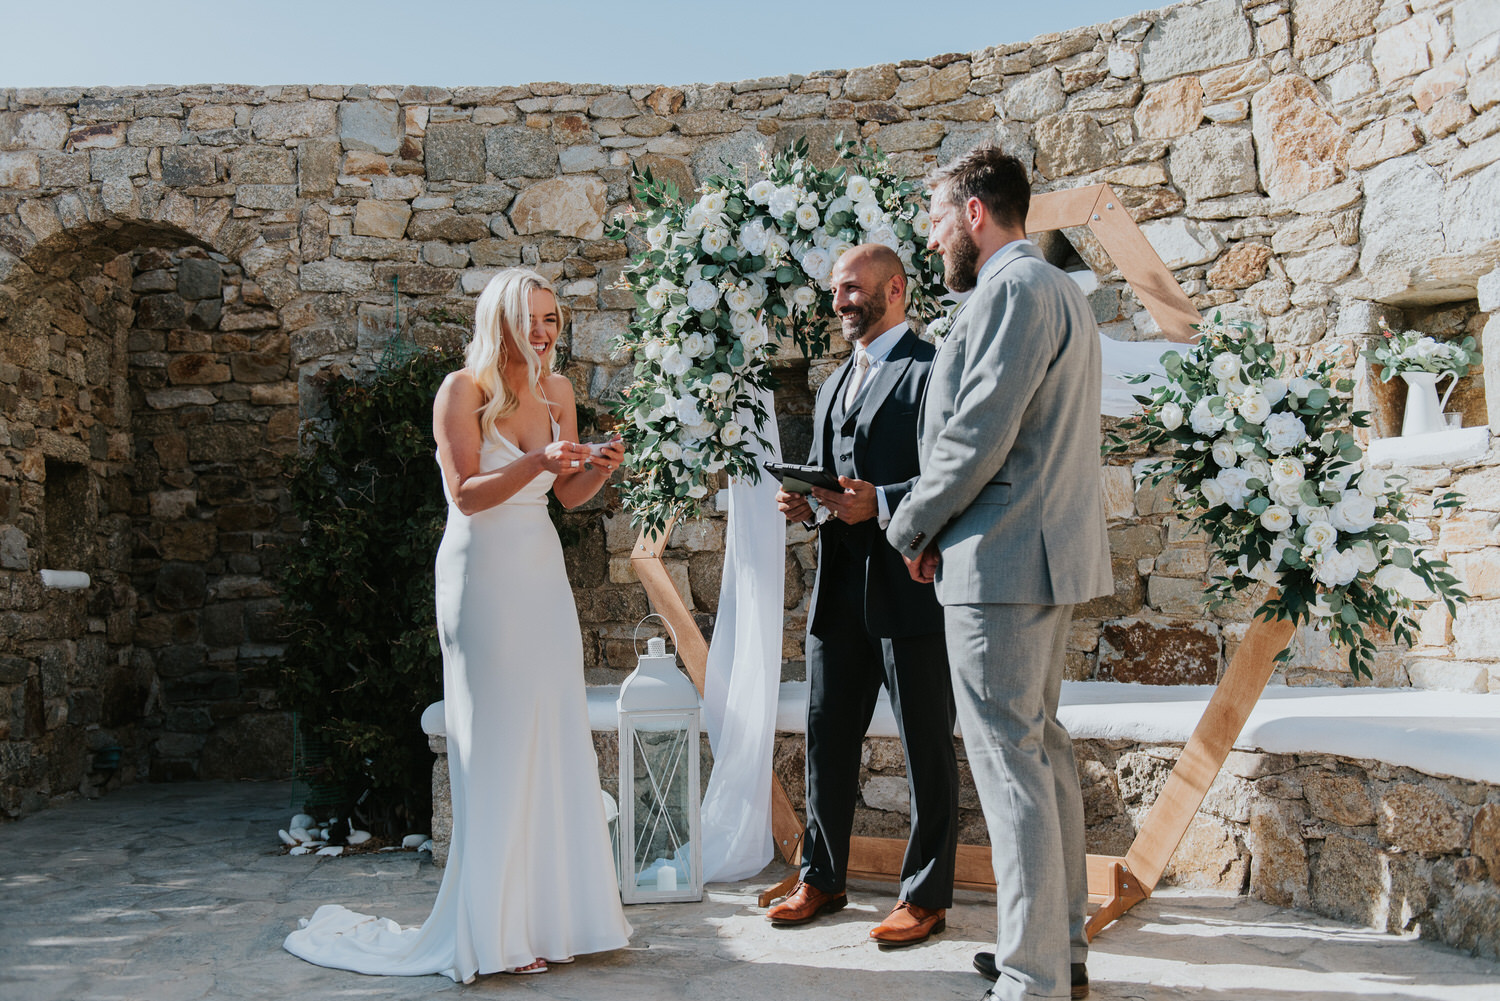 Mykonos wedding photographer: bride laughing holding her vows in front of the floral arch as celebrant and groom watch her.